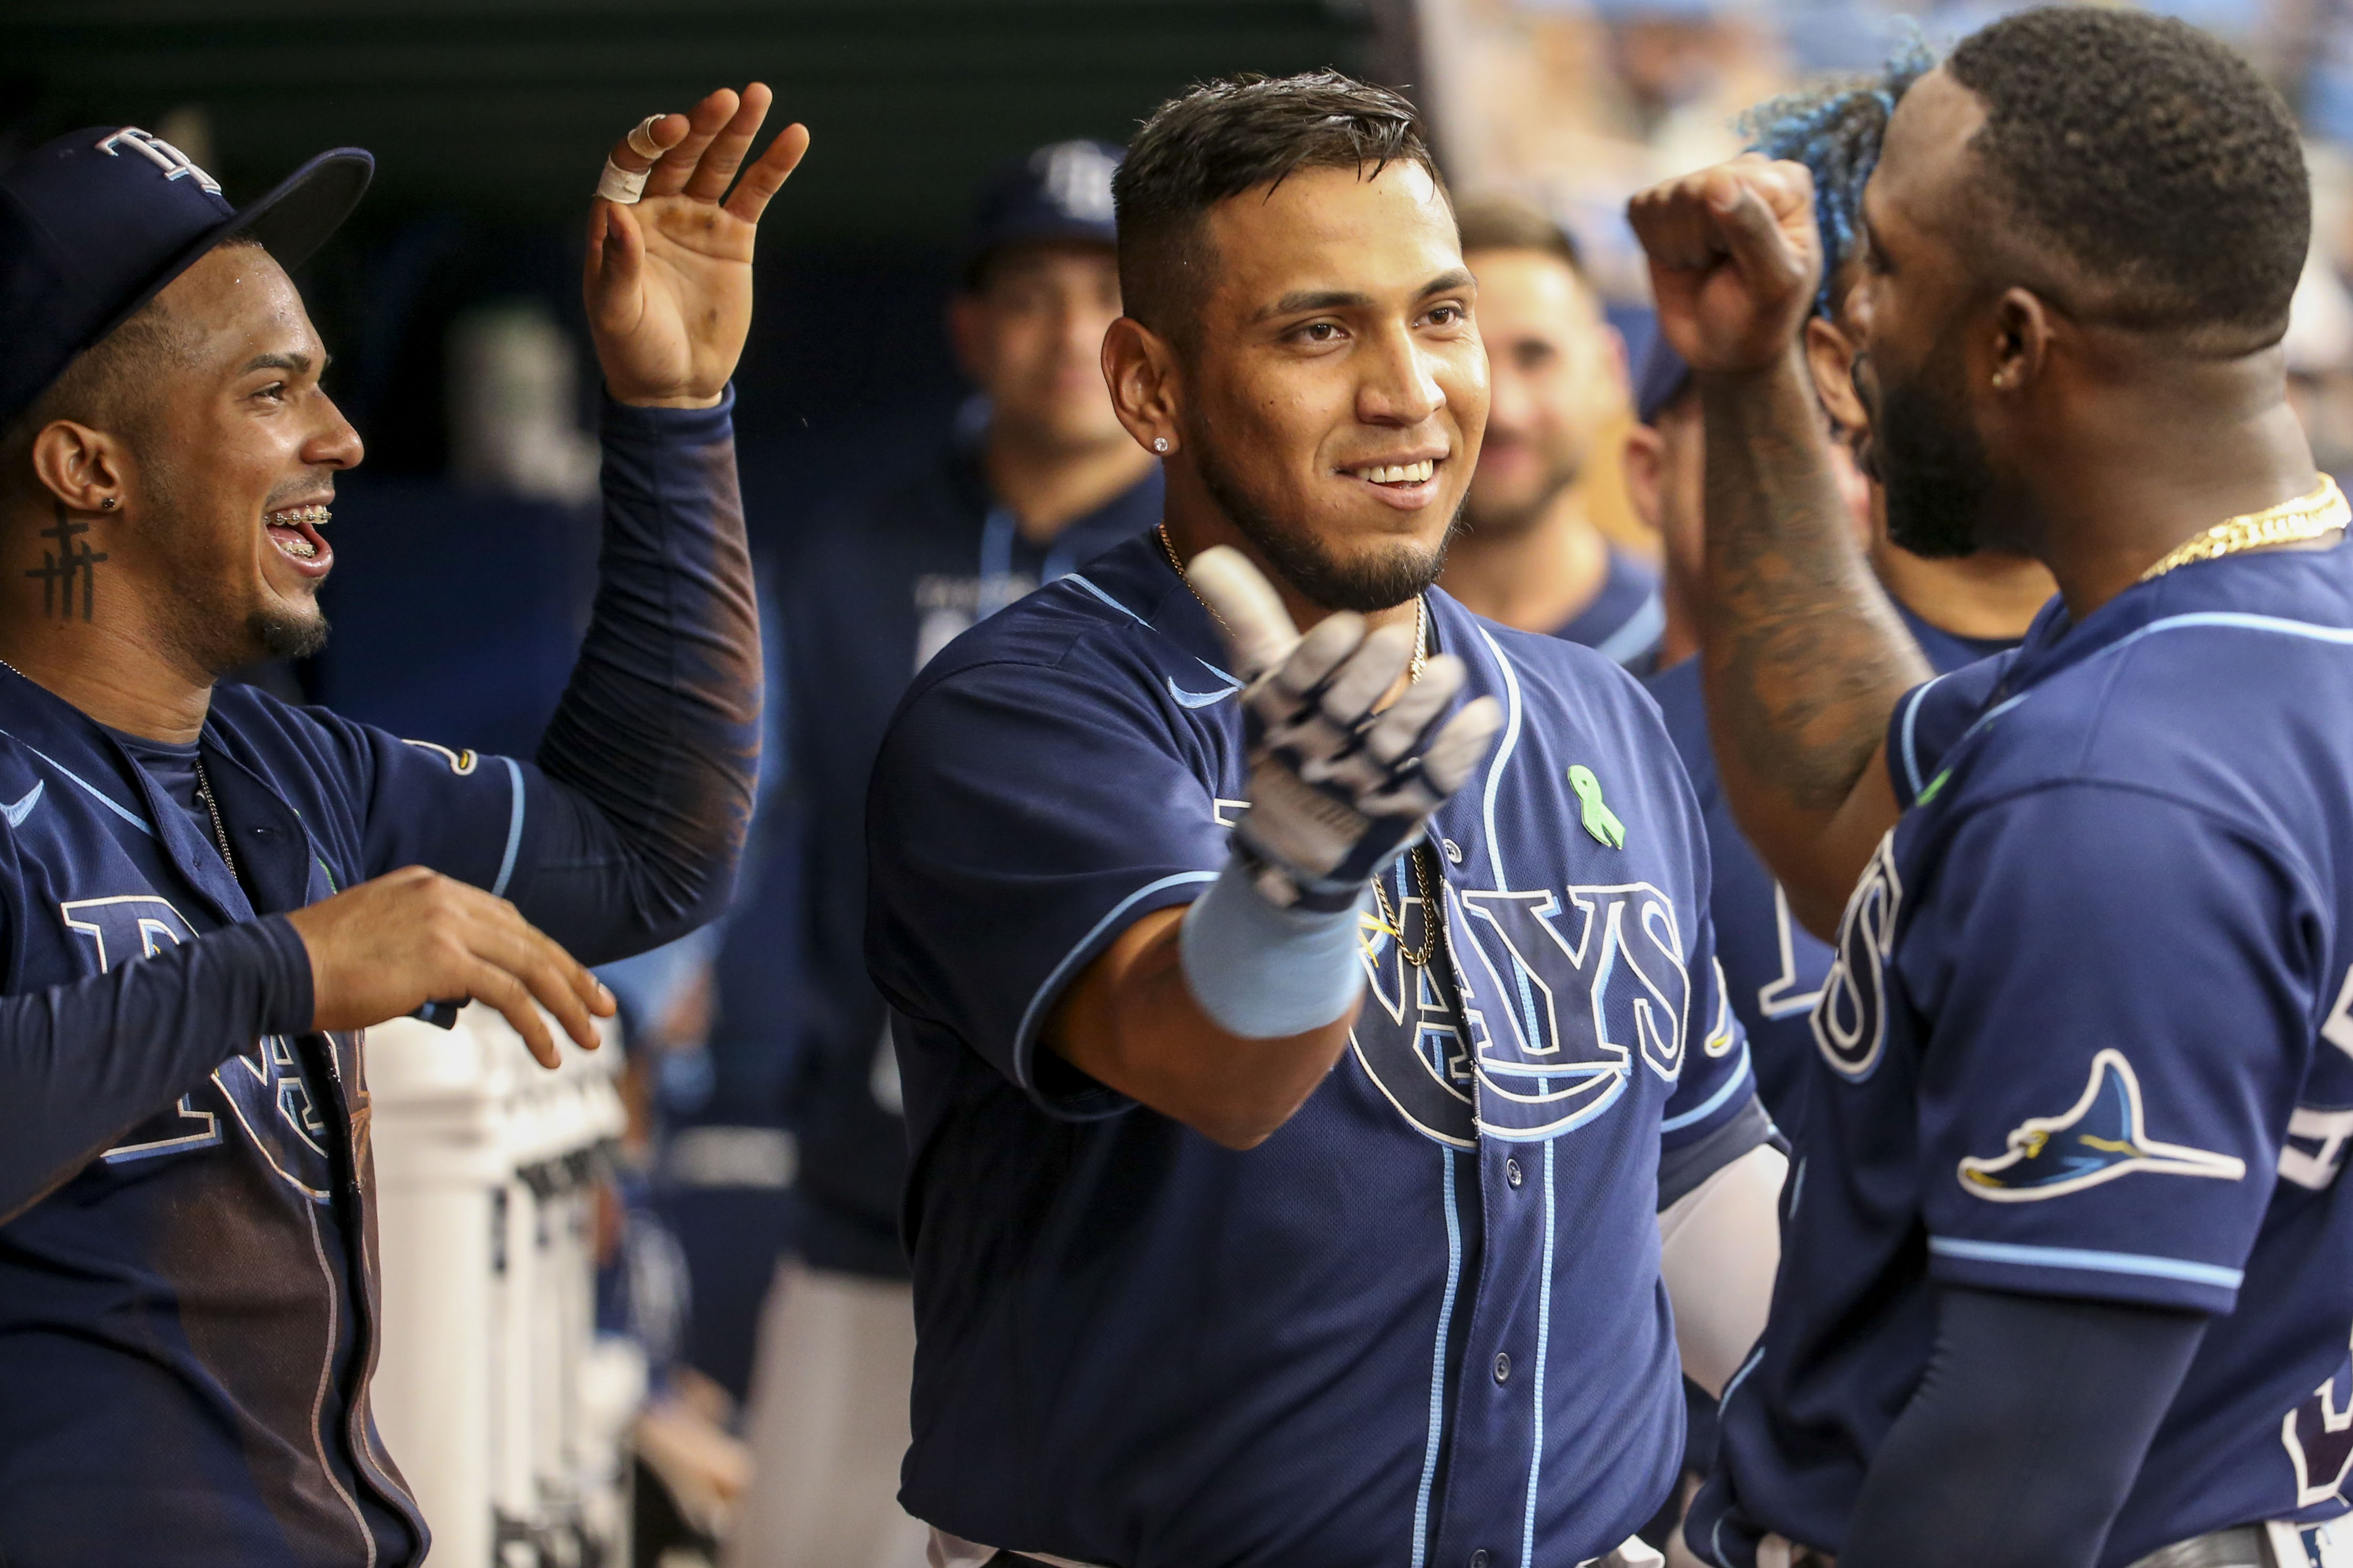 Rays beat Rangers at their own game, sending message as Isaac Paredes  torches Texas